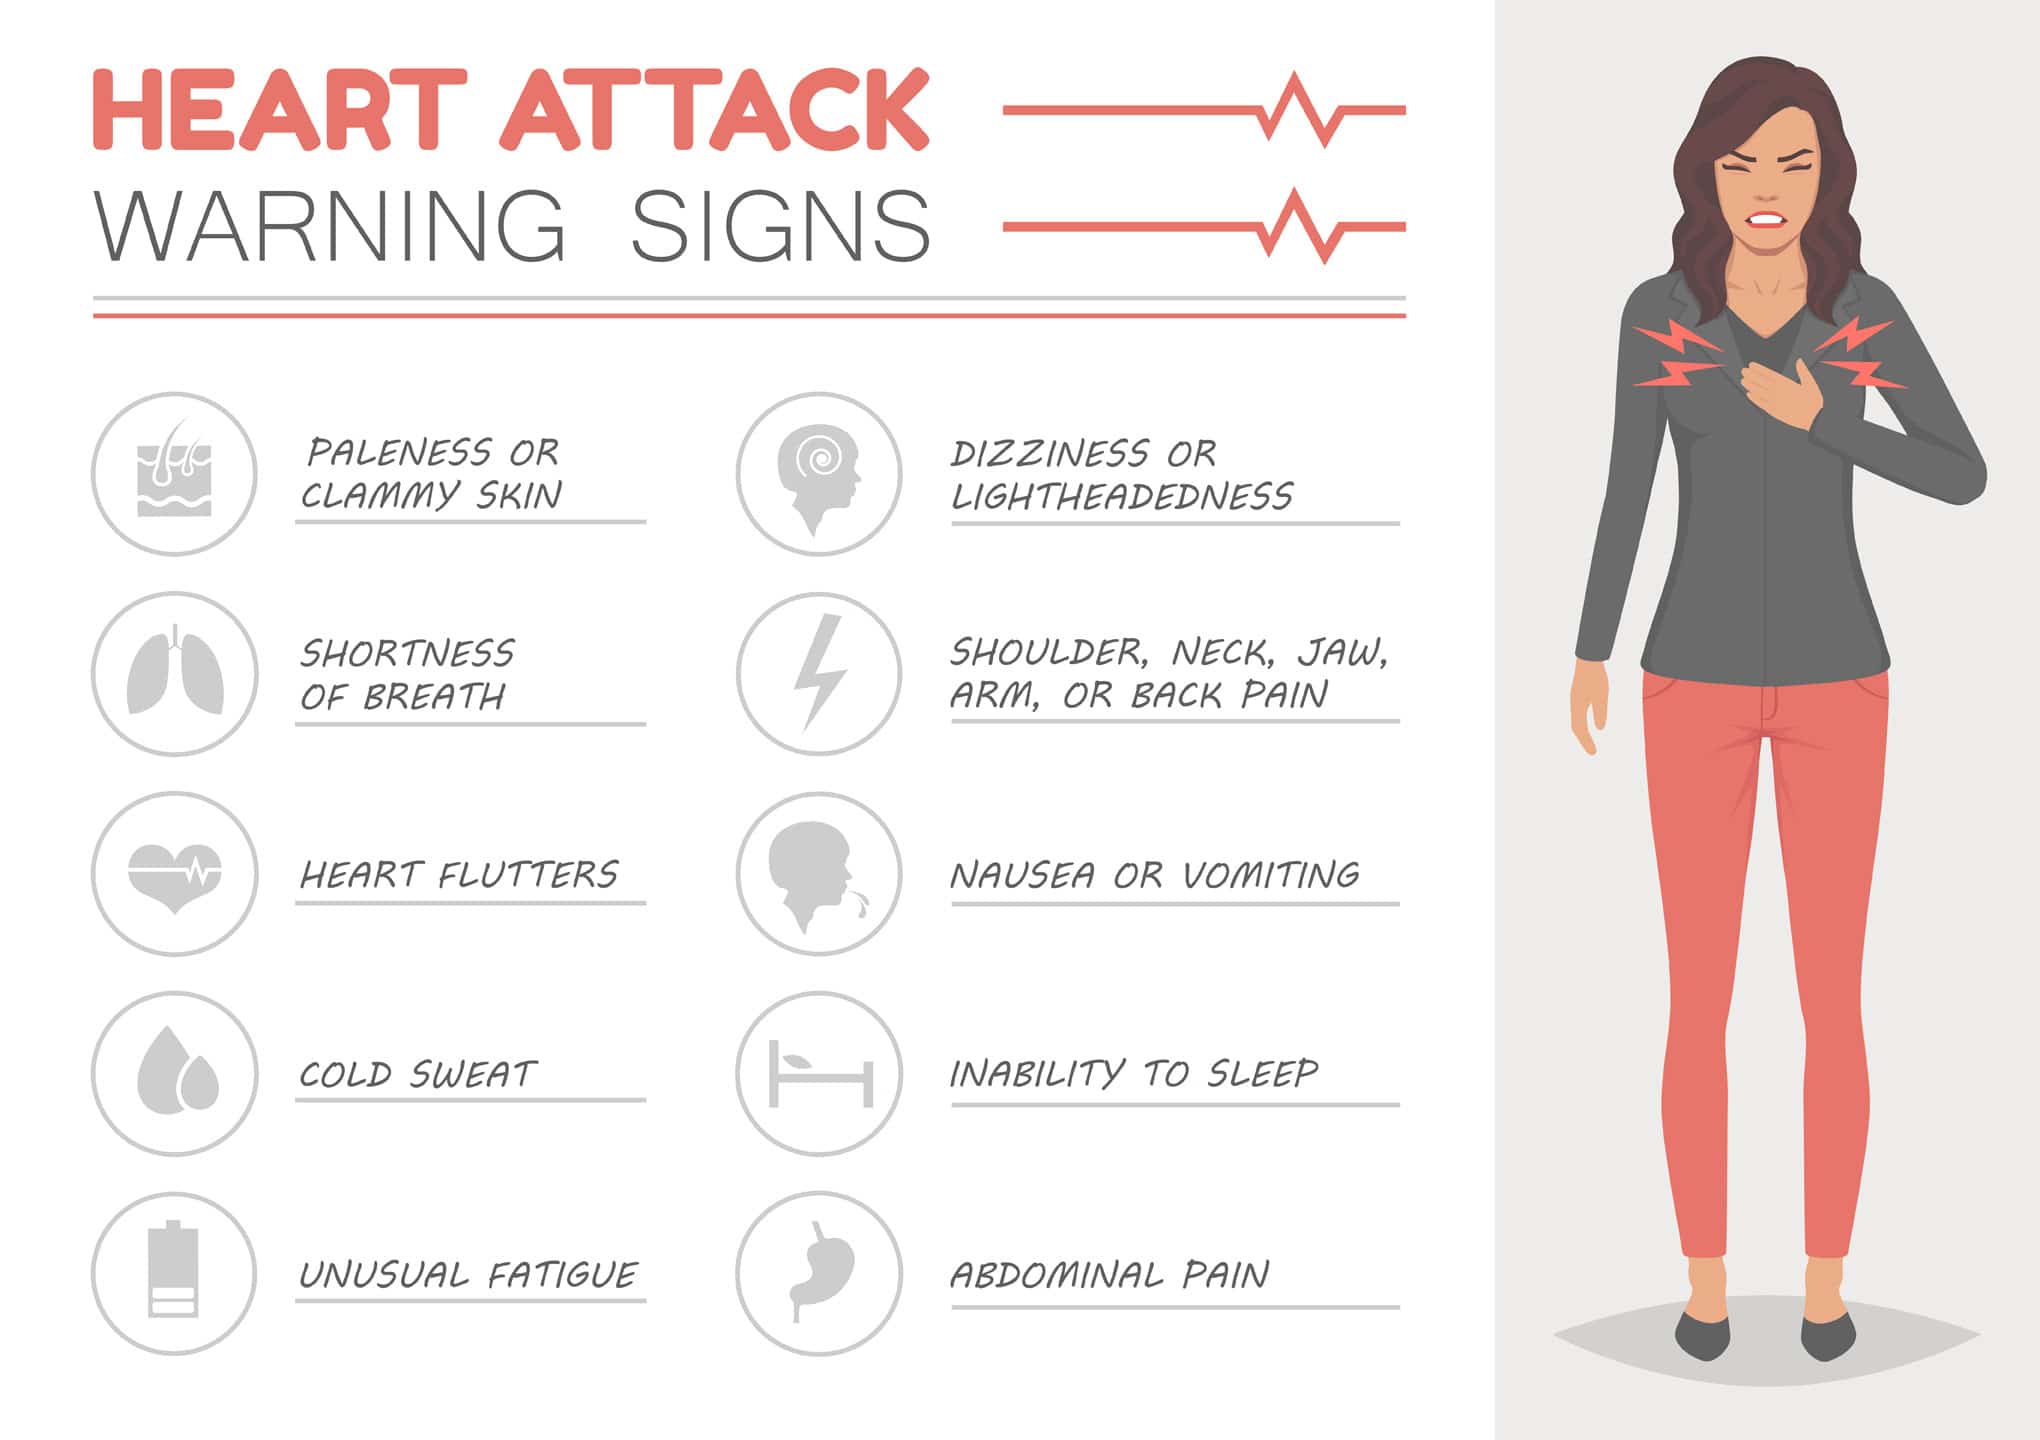 What Does a Heart Attack Actually Feel Like?